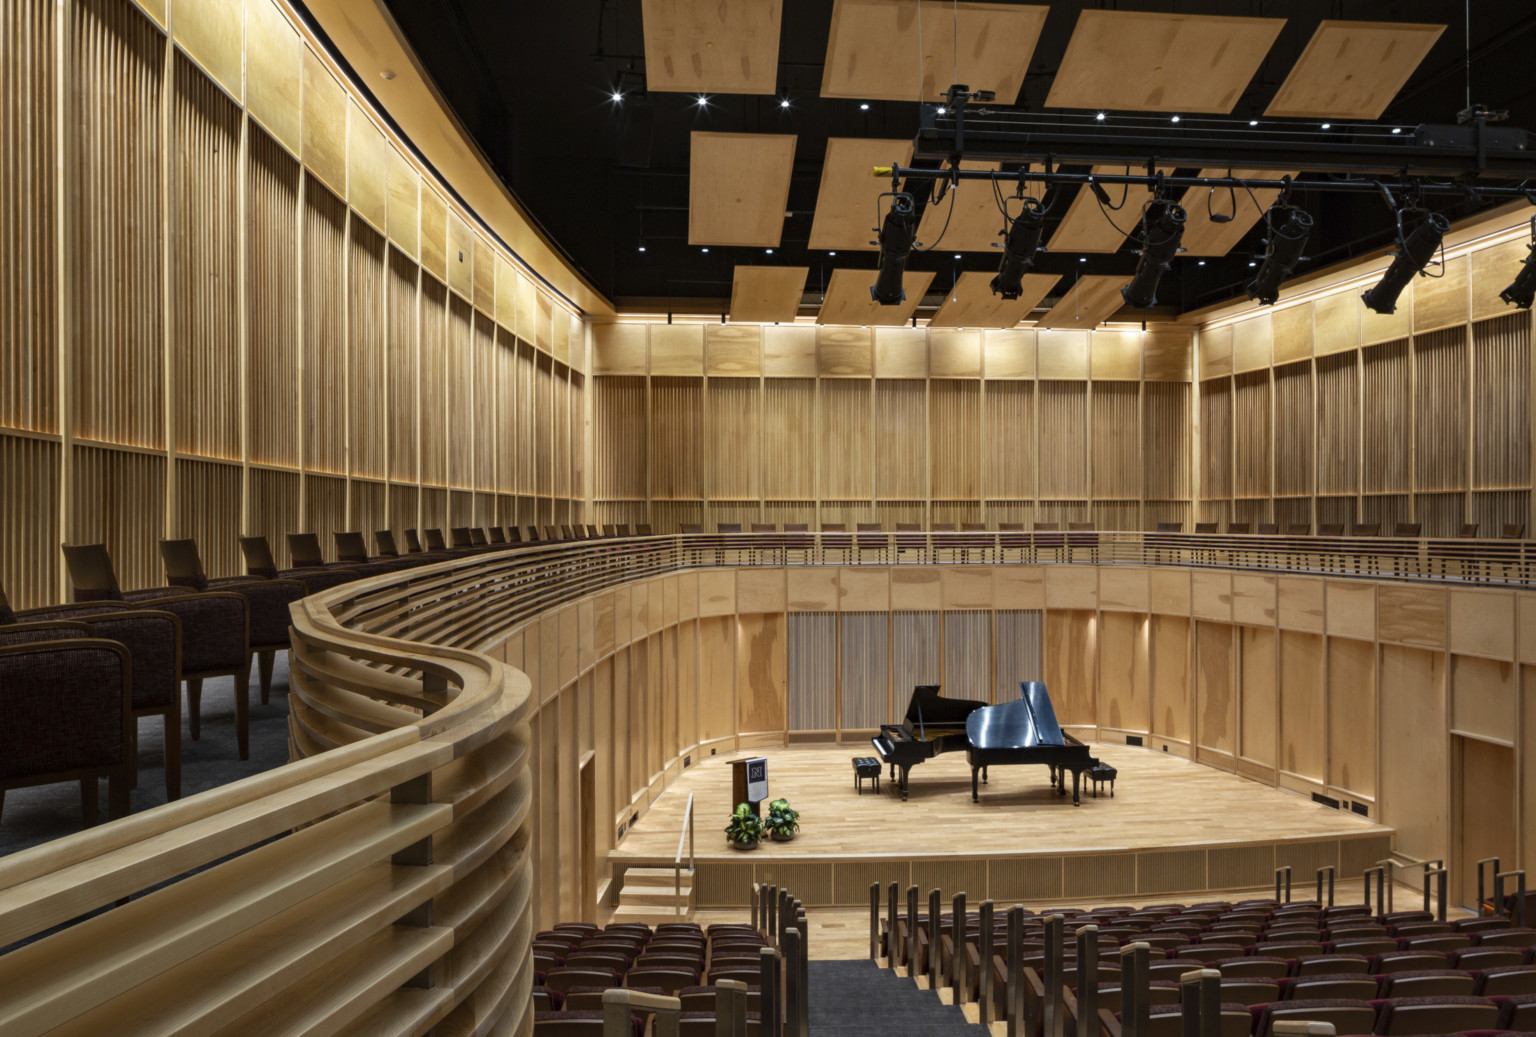 View from the back of wooden wall oval auditorium with piano on stage below wood acoustic panels and balcony behind stage